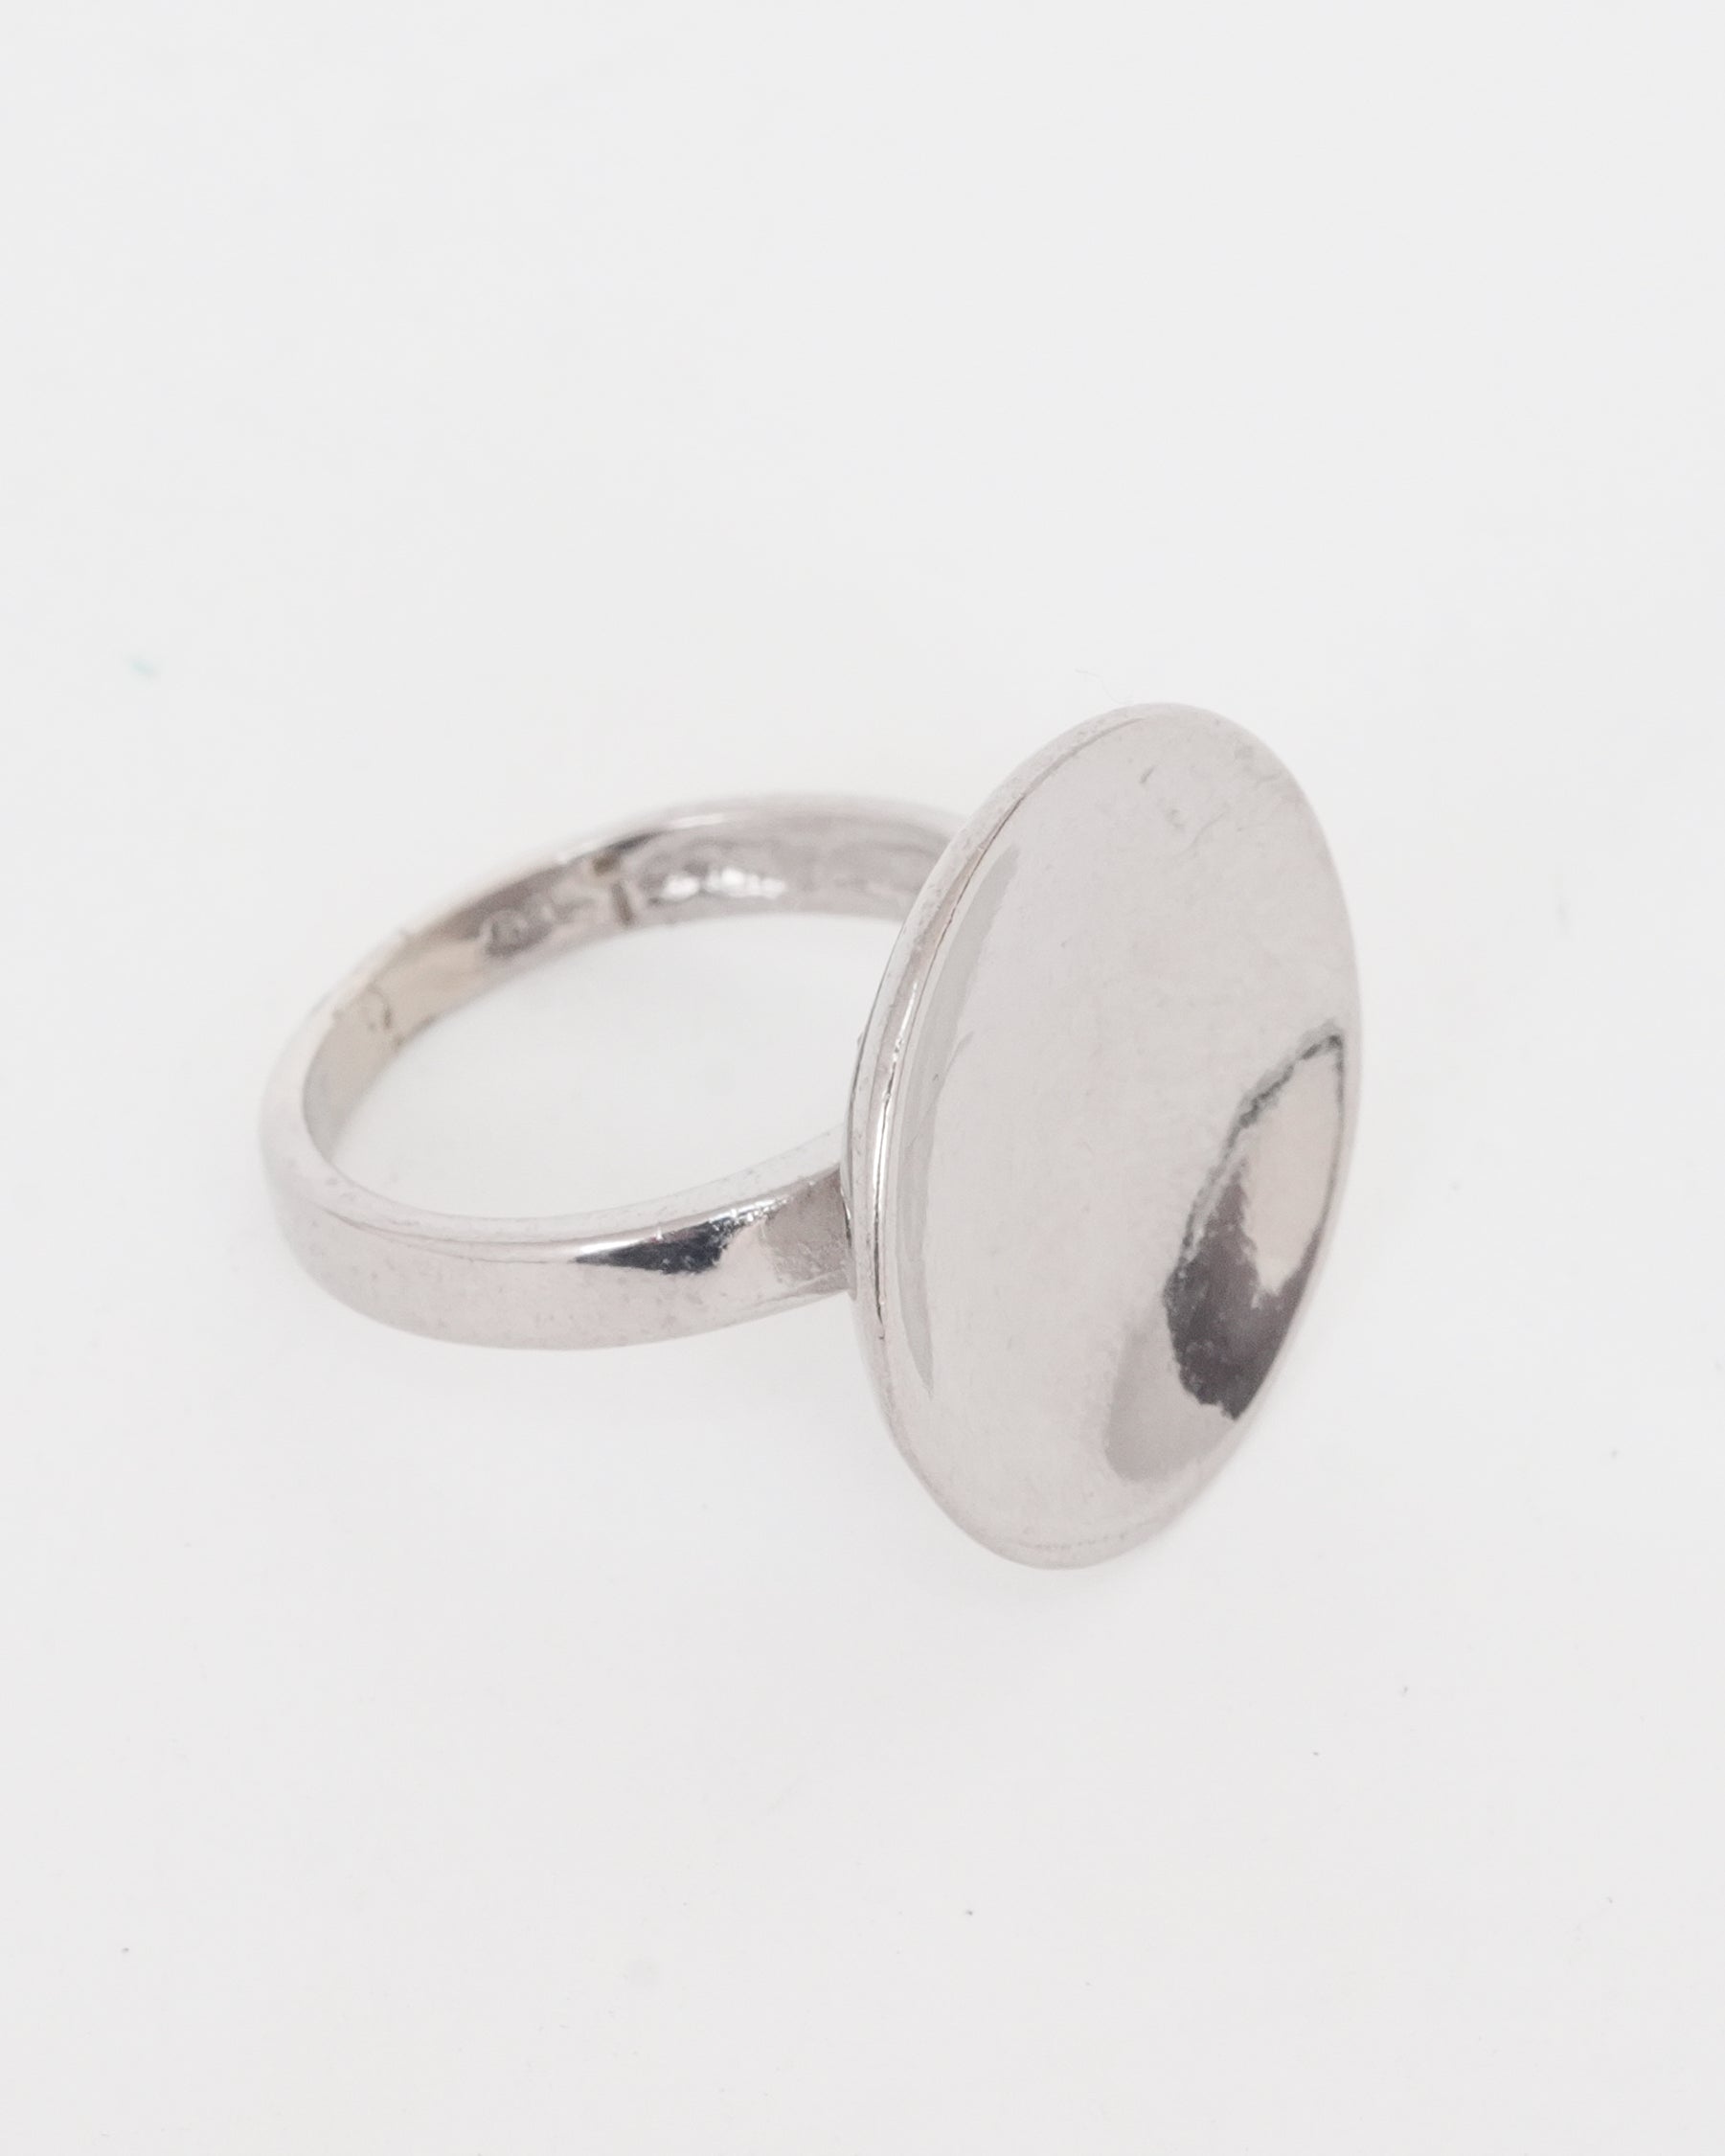 Silver Ring: Size12